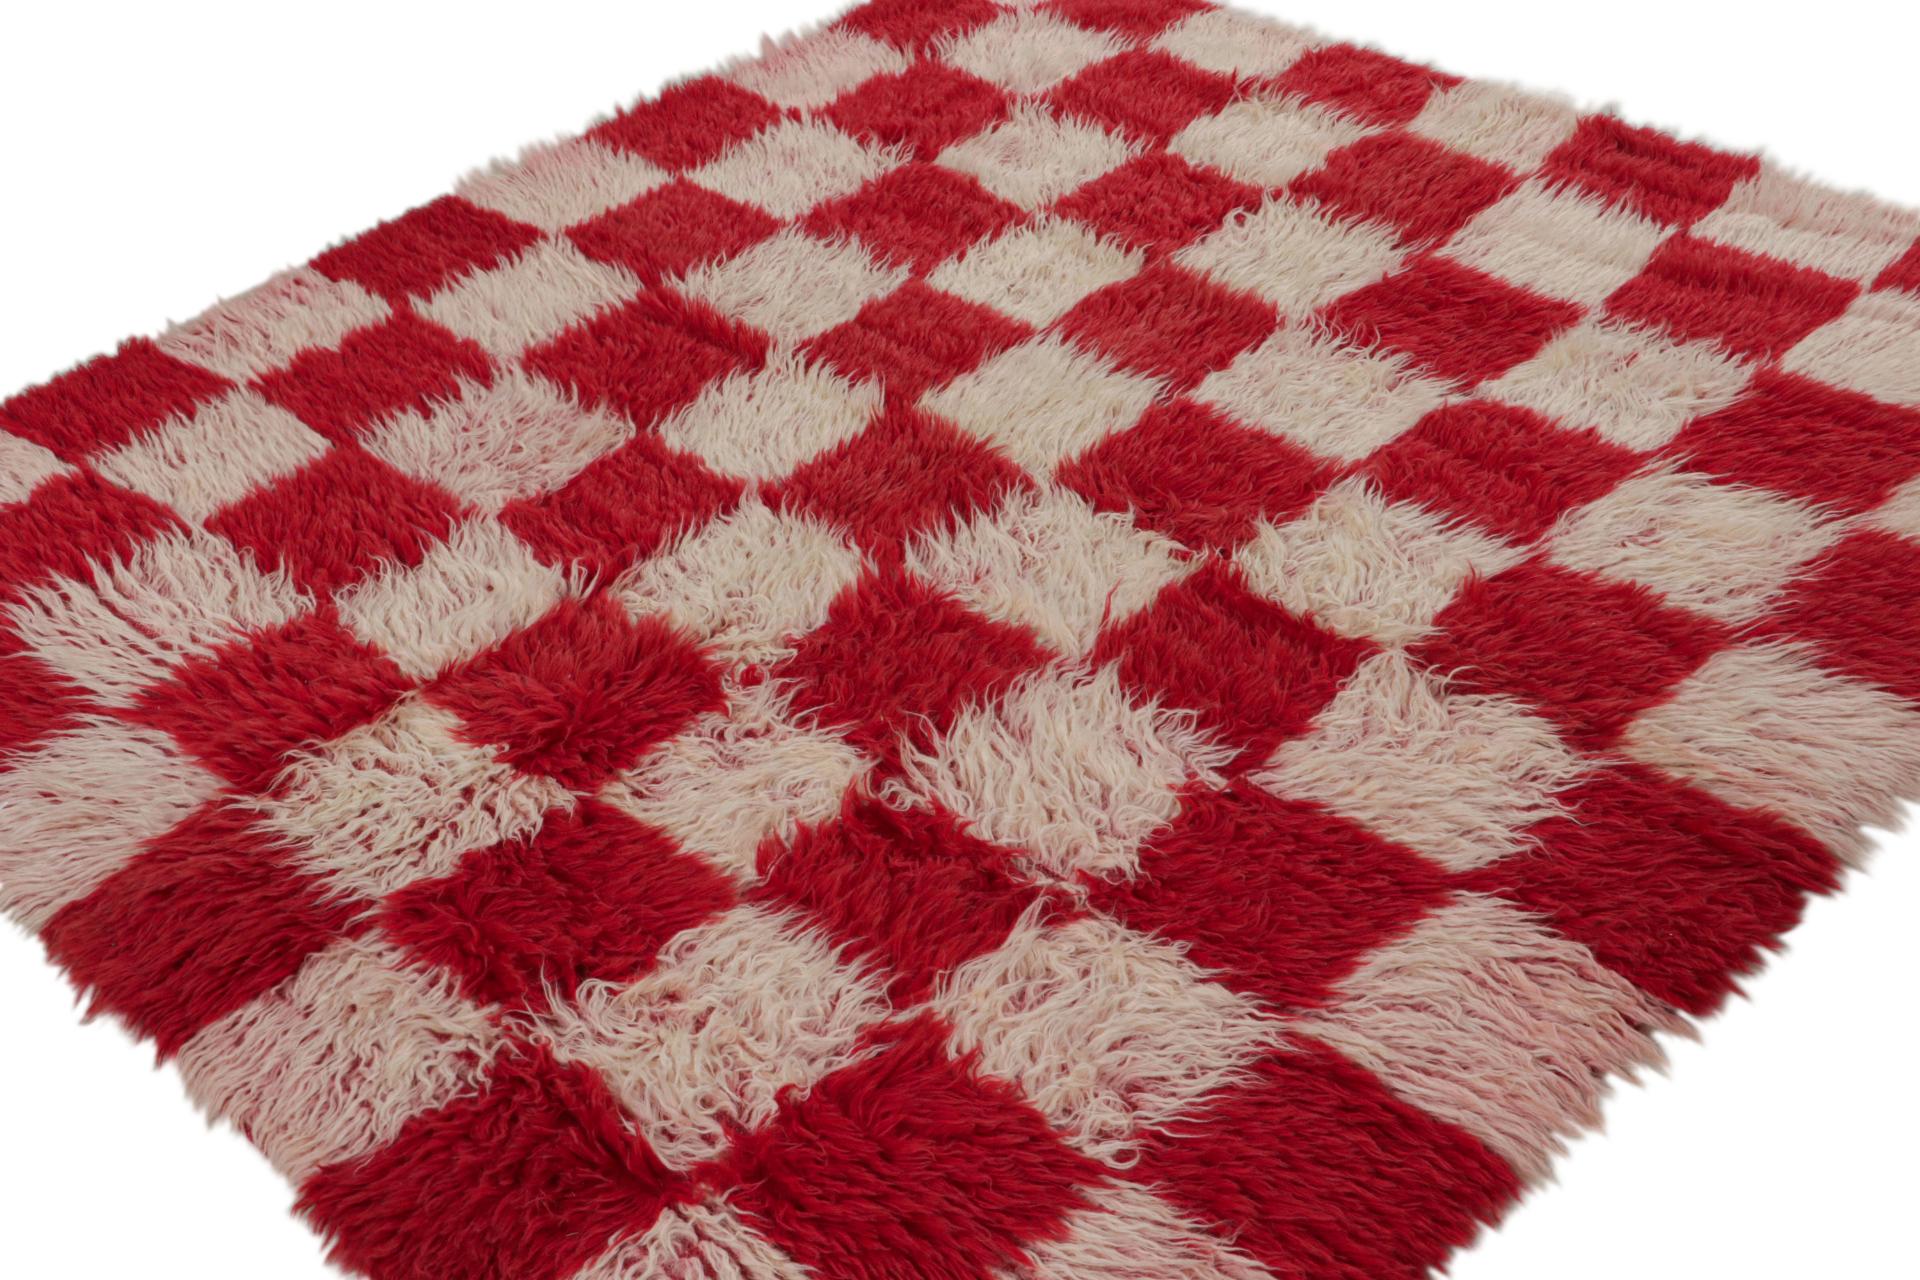 Hand-knotted in wool, this 7x7 vintage Tulu rug, circa 1950-1960, is among the family of Tulus with minimalist checkered geometric patterns, as seen in the rich red and pink squares.  

On the Design: 

Tulus are some of the most sought-after